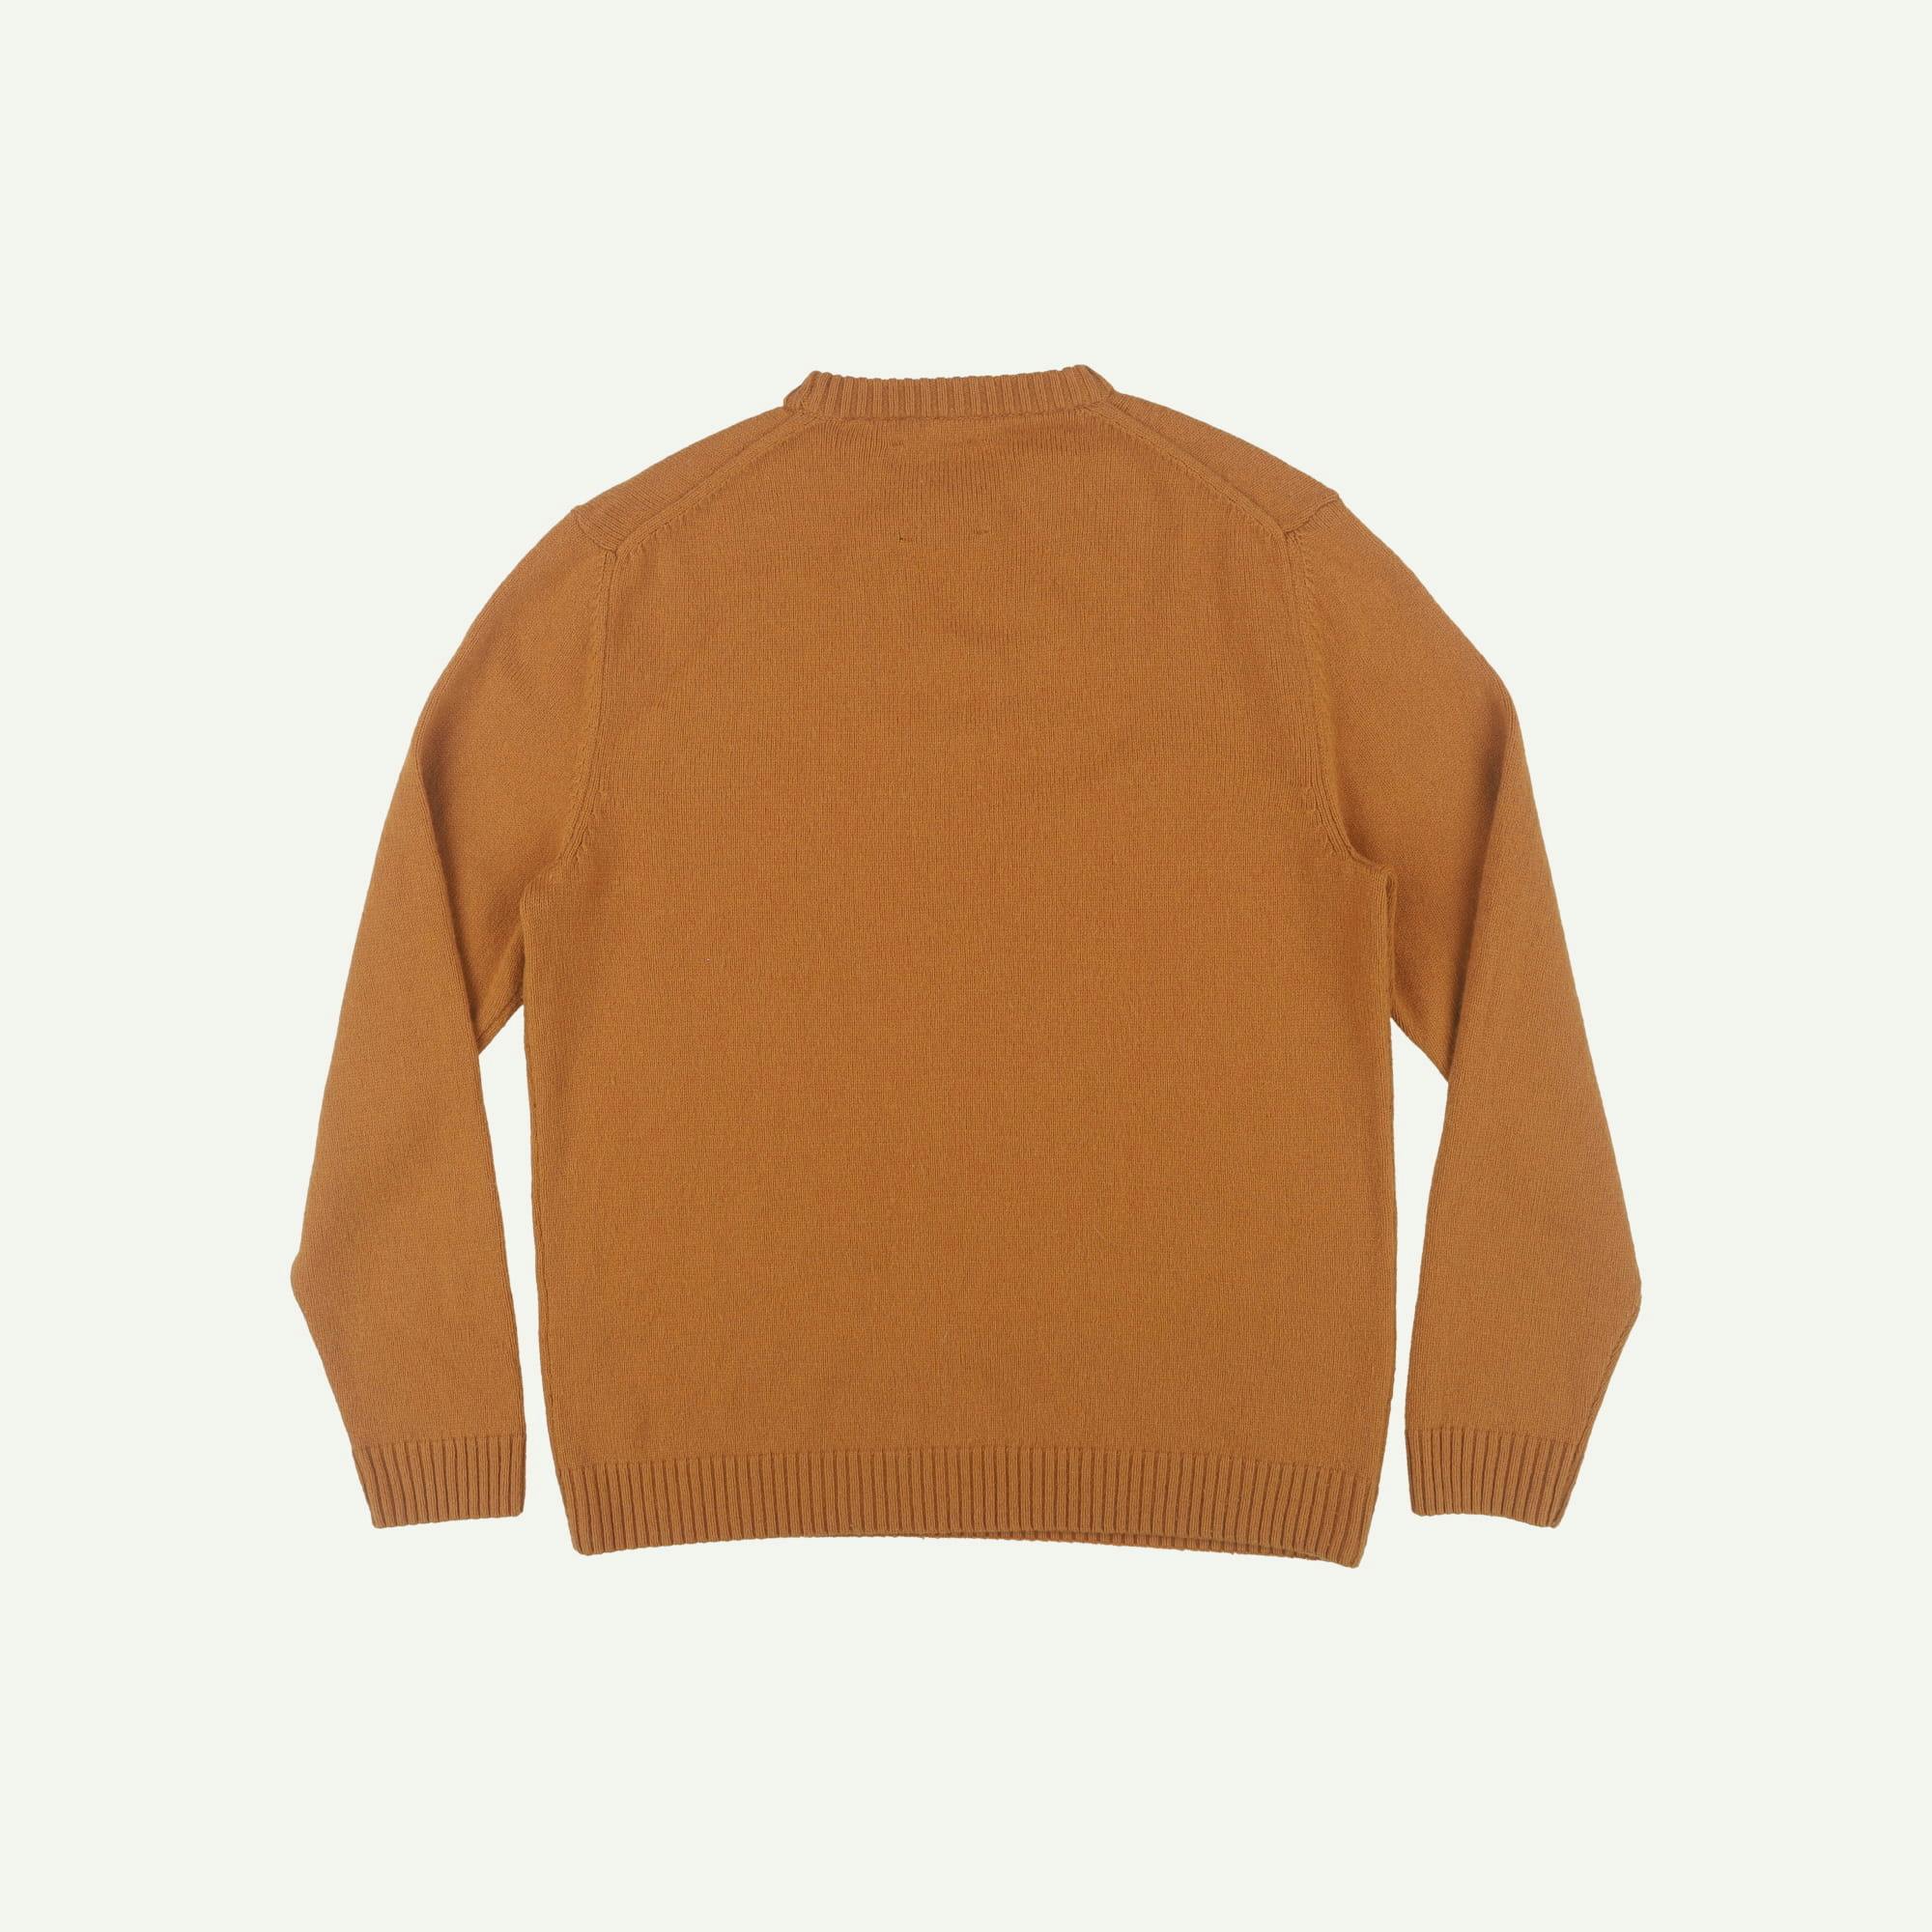 Finisterre As new Gold Columba Jumper